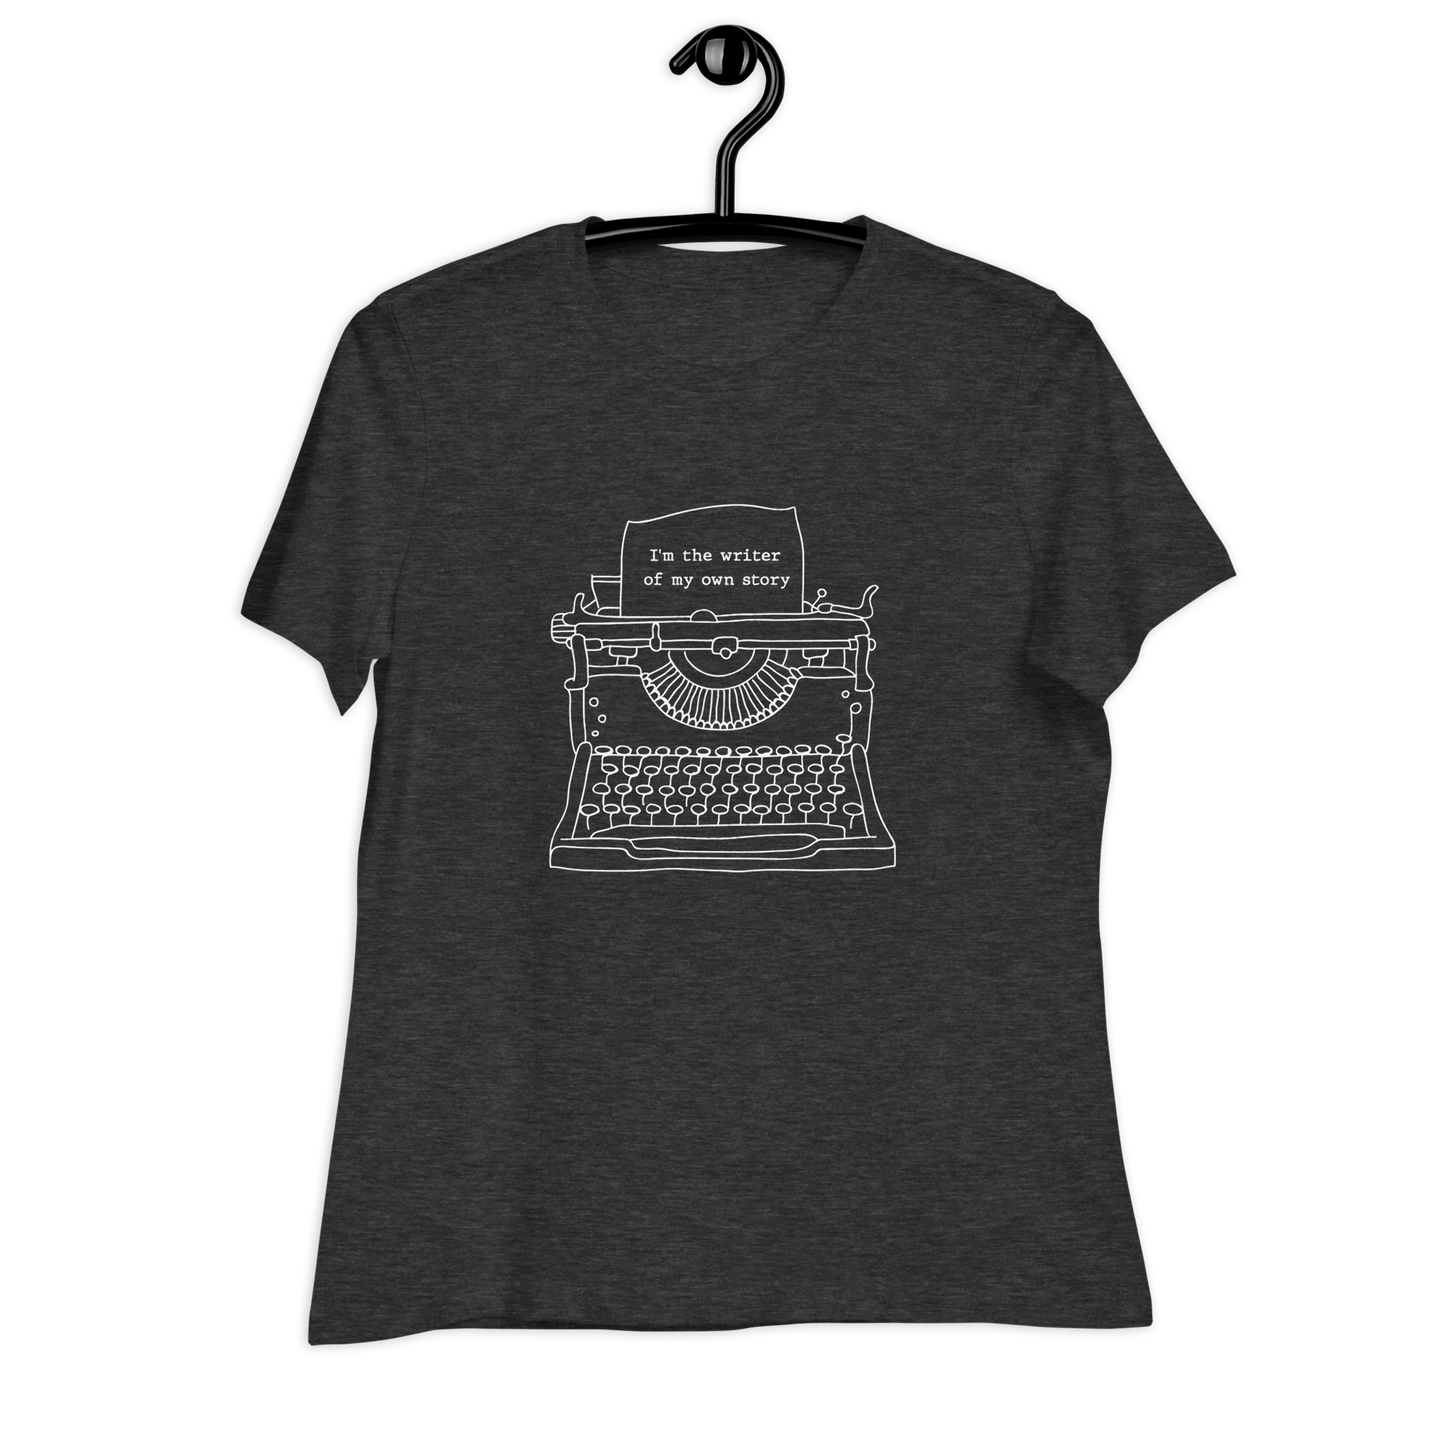 I'm the Writer of My Own Story Tee